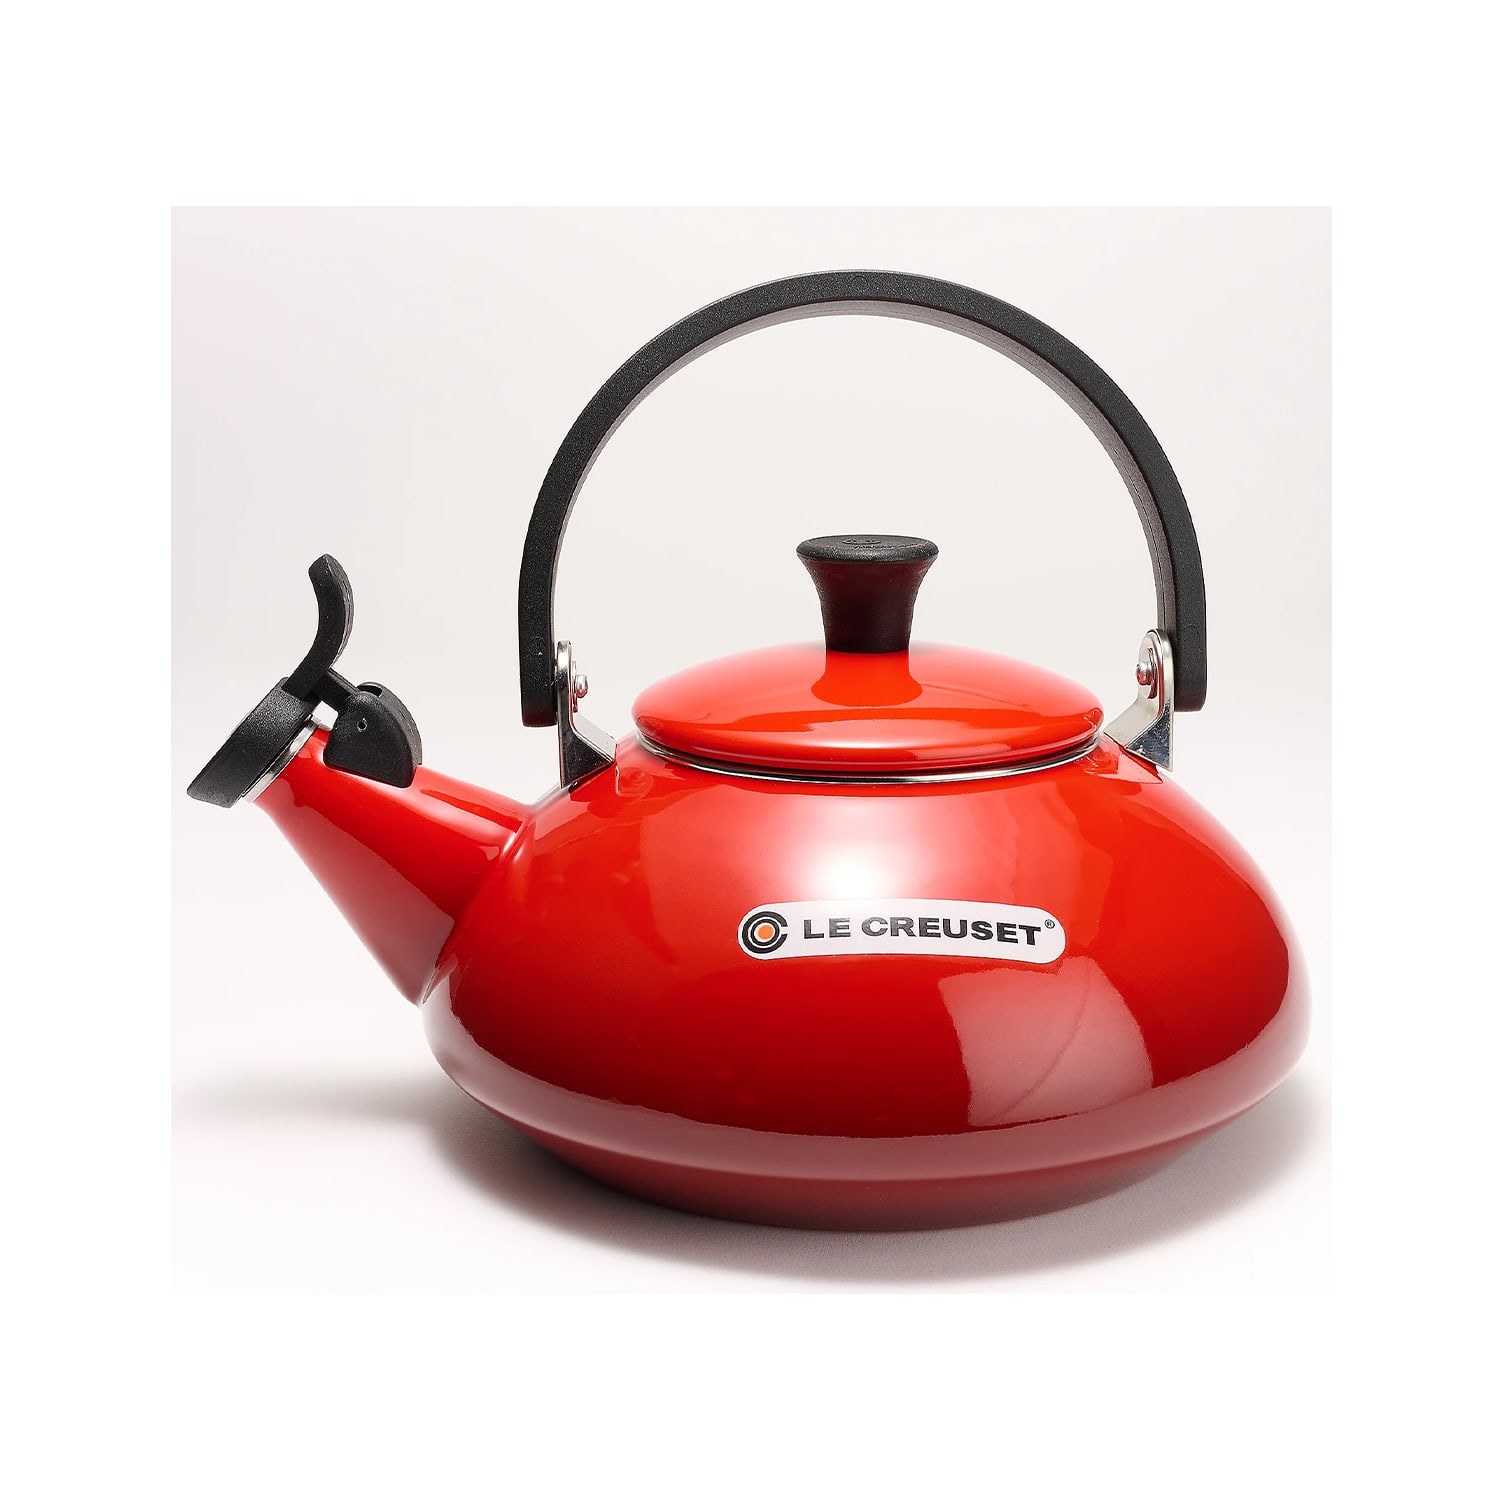 Up to 70% off on cookware in rare Le Creuset 'Factory to Table' sale 